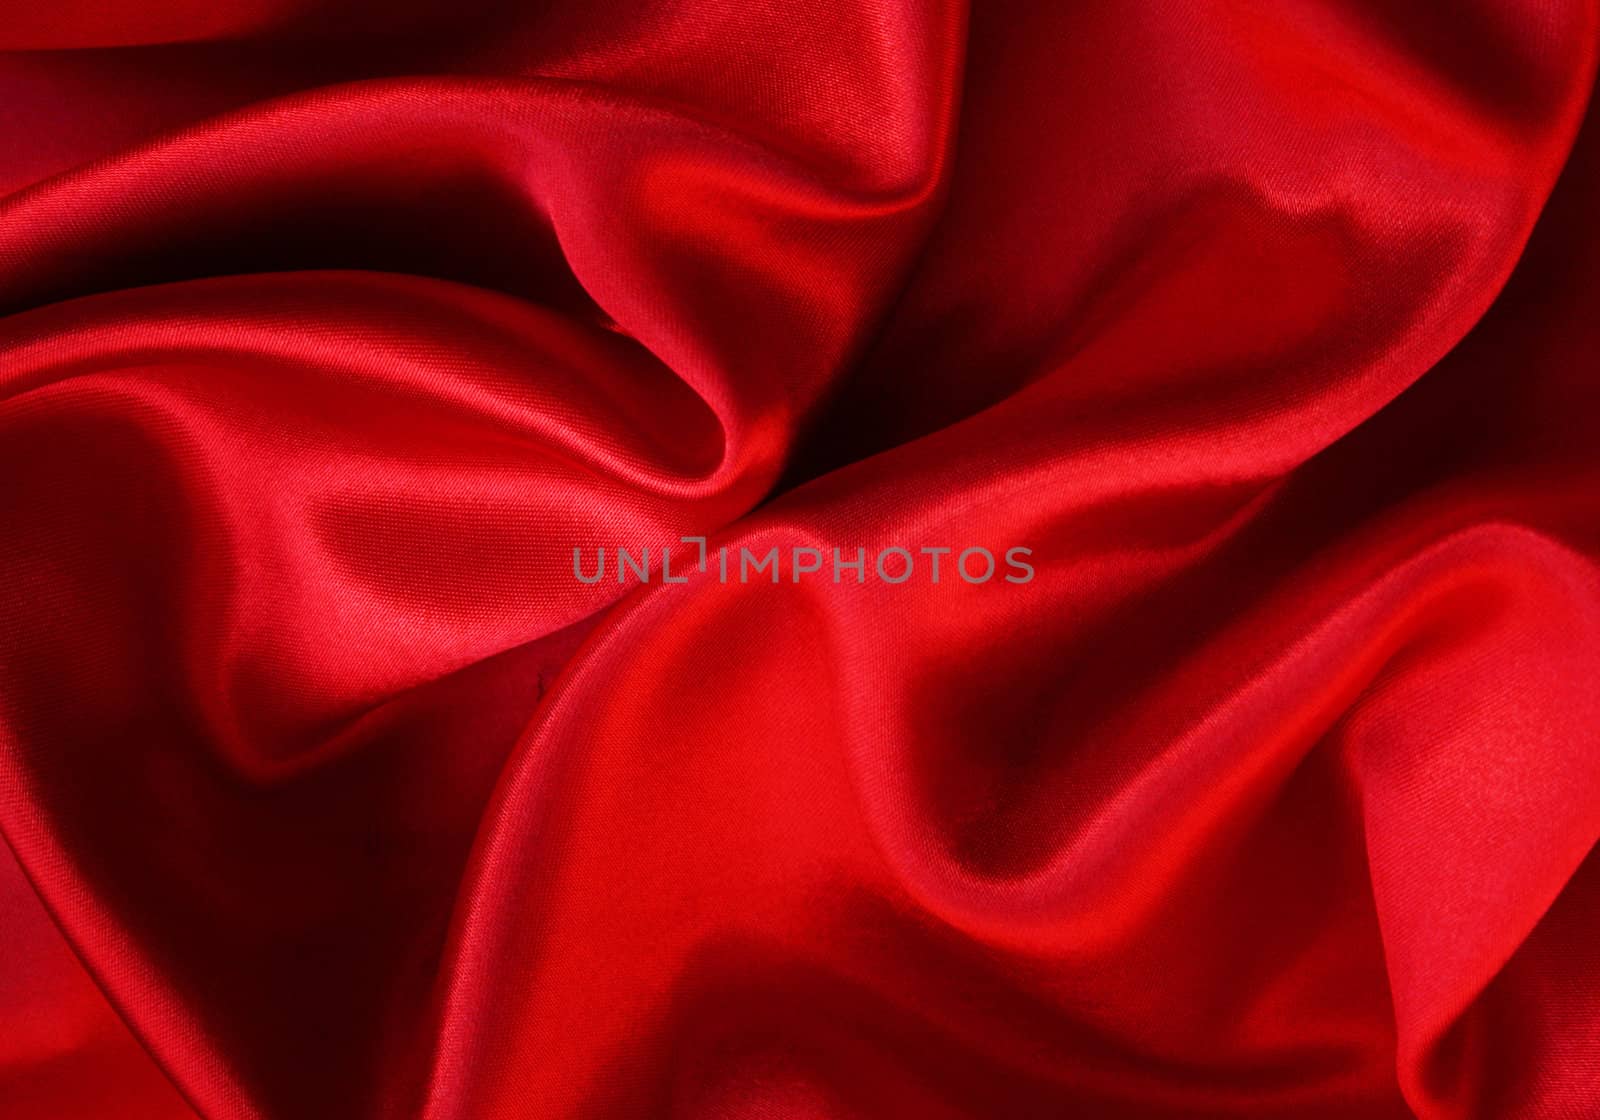 Smooth Red Silk as background